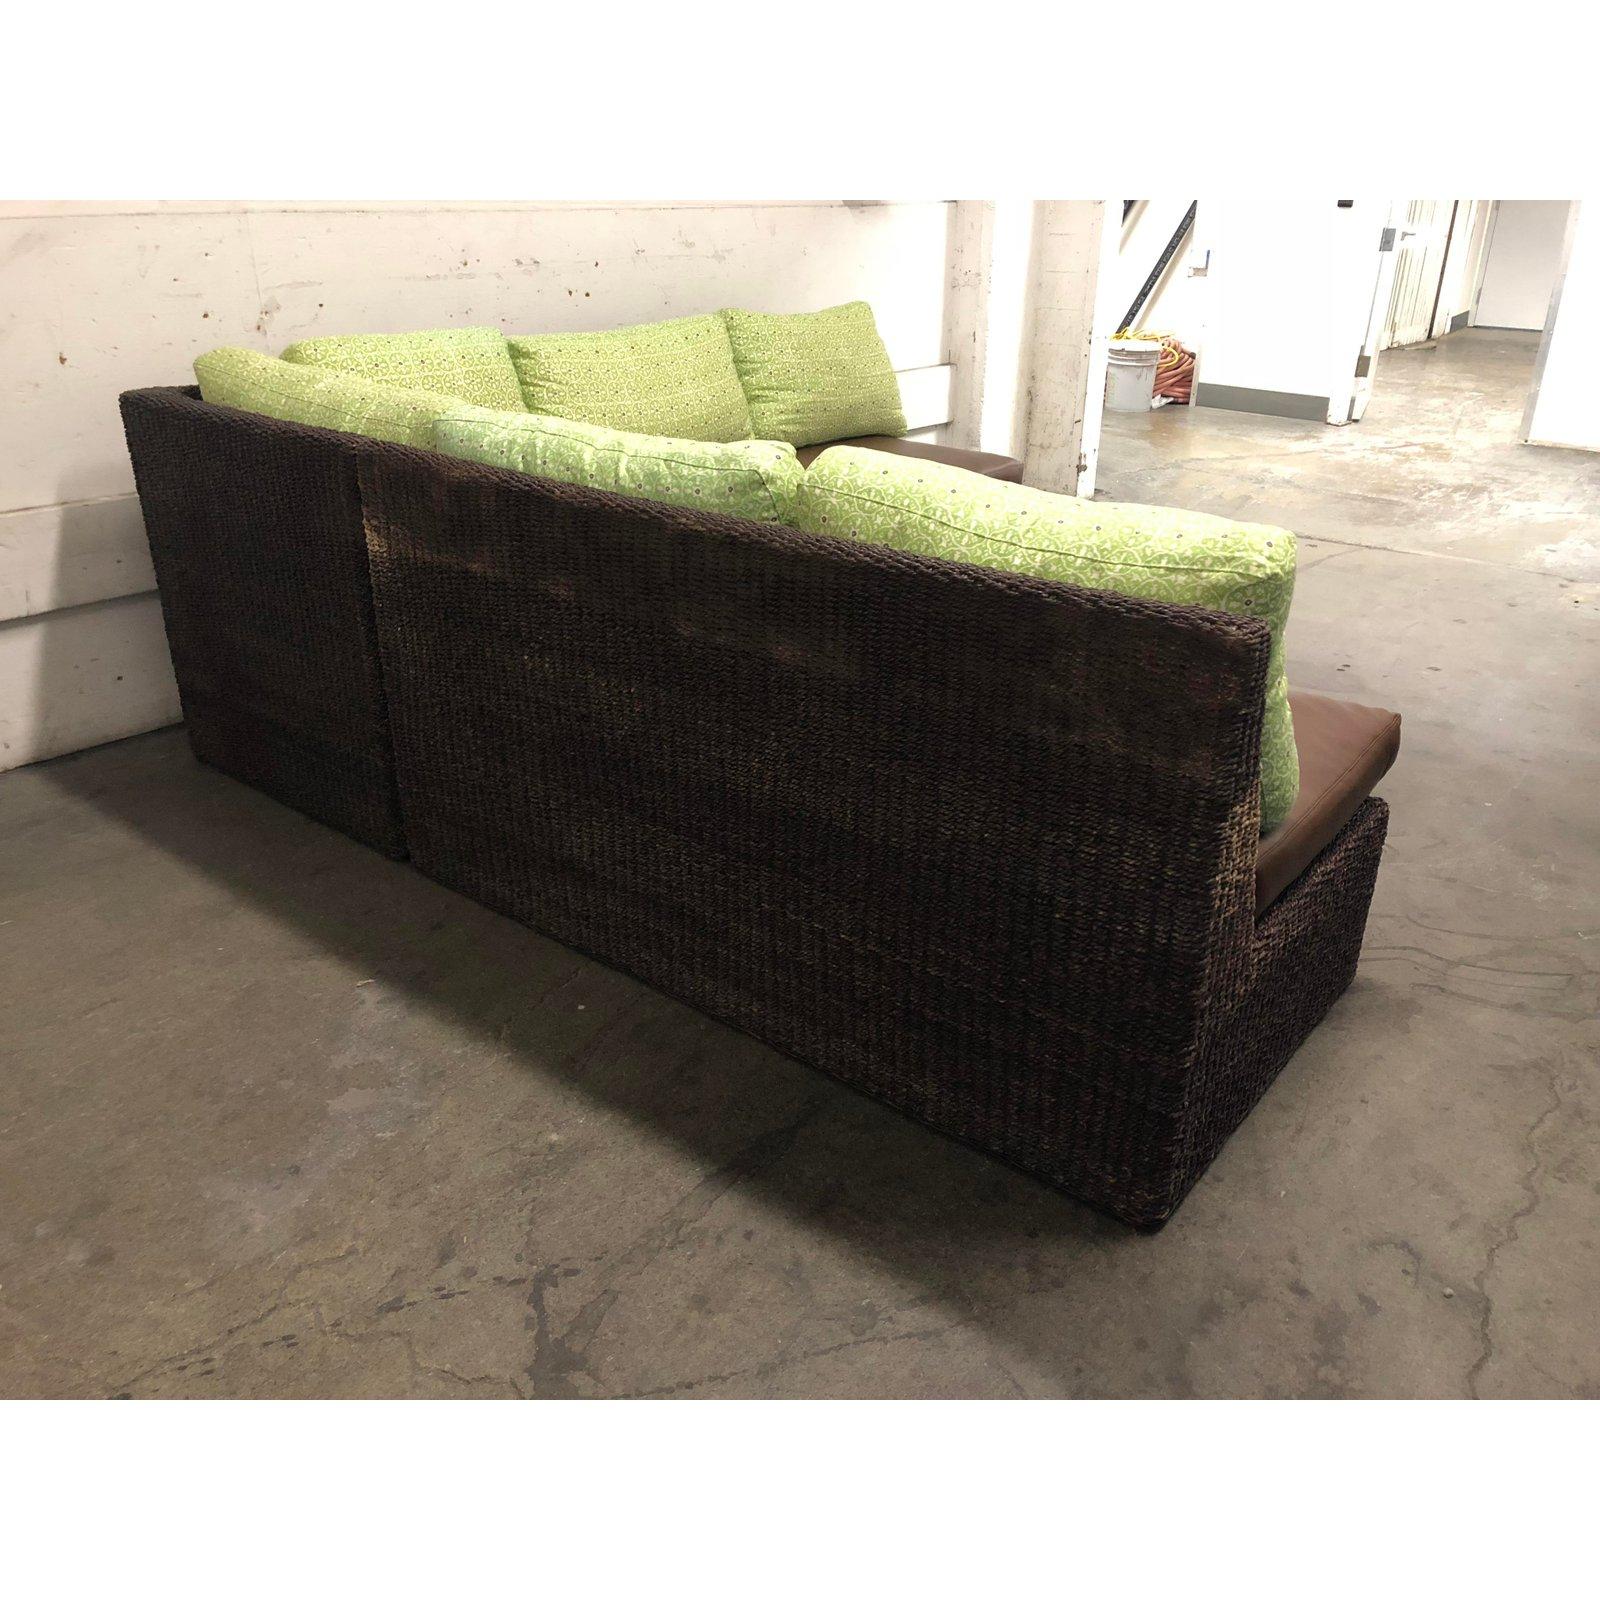 Walter's Wicker Works Two-Piece Sectional In Good Condition For Sale In San Francisco, CA